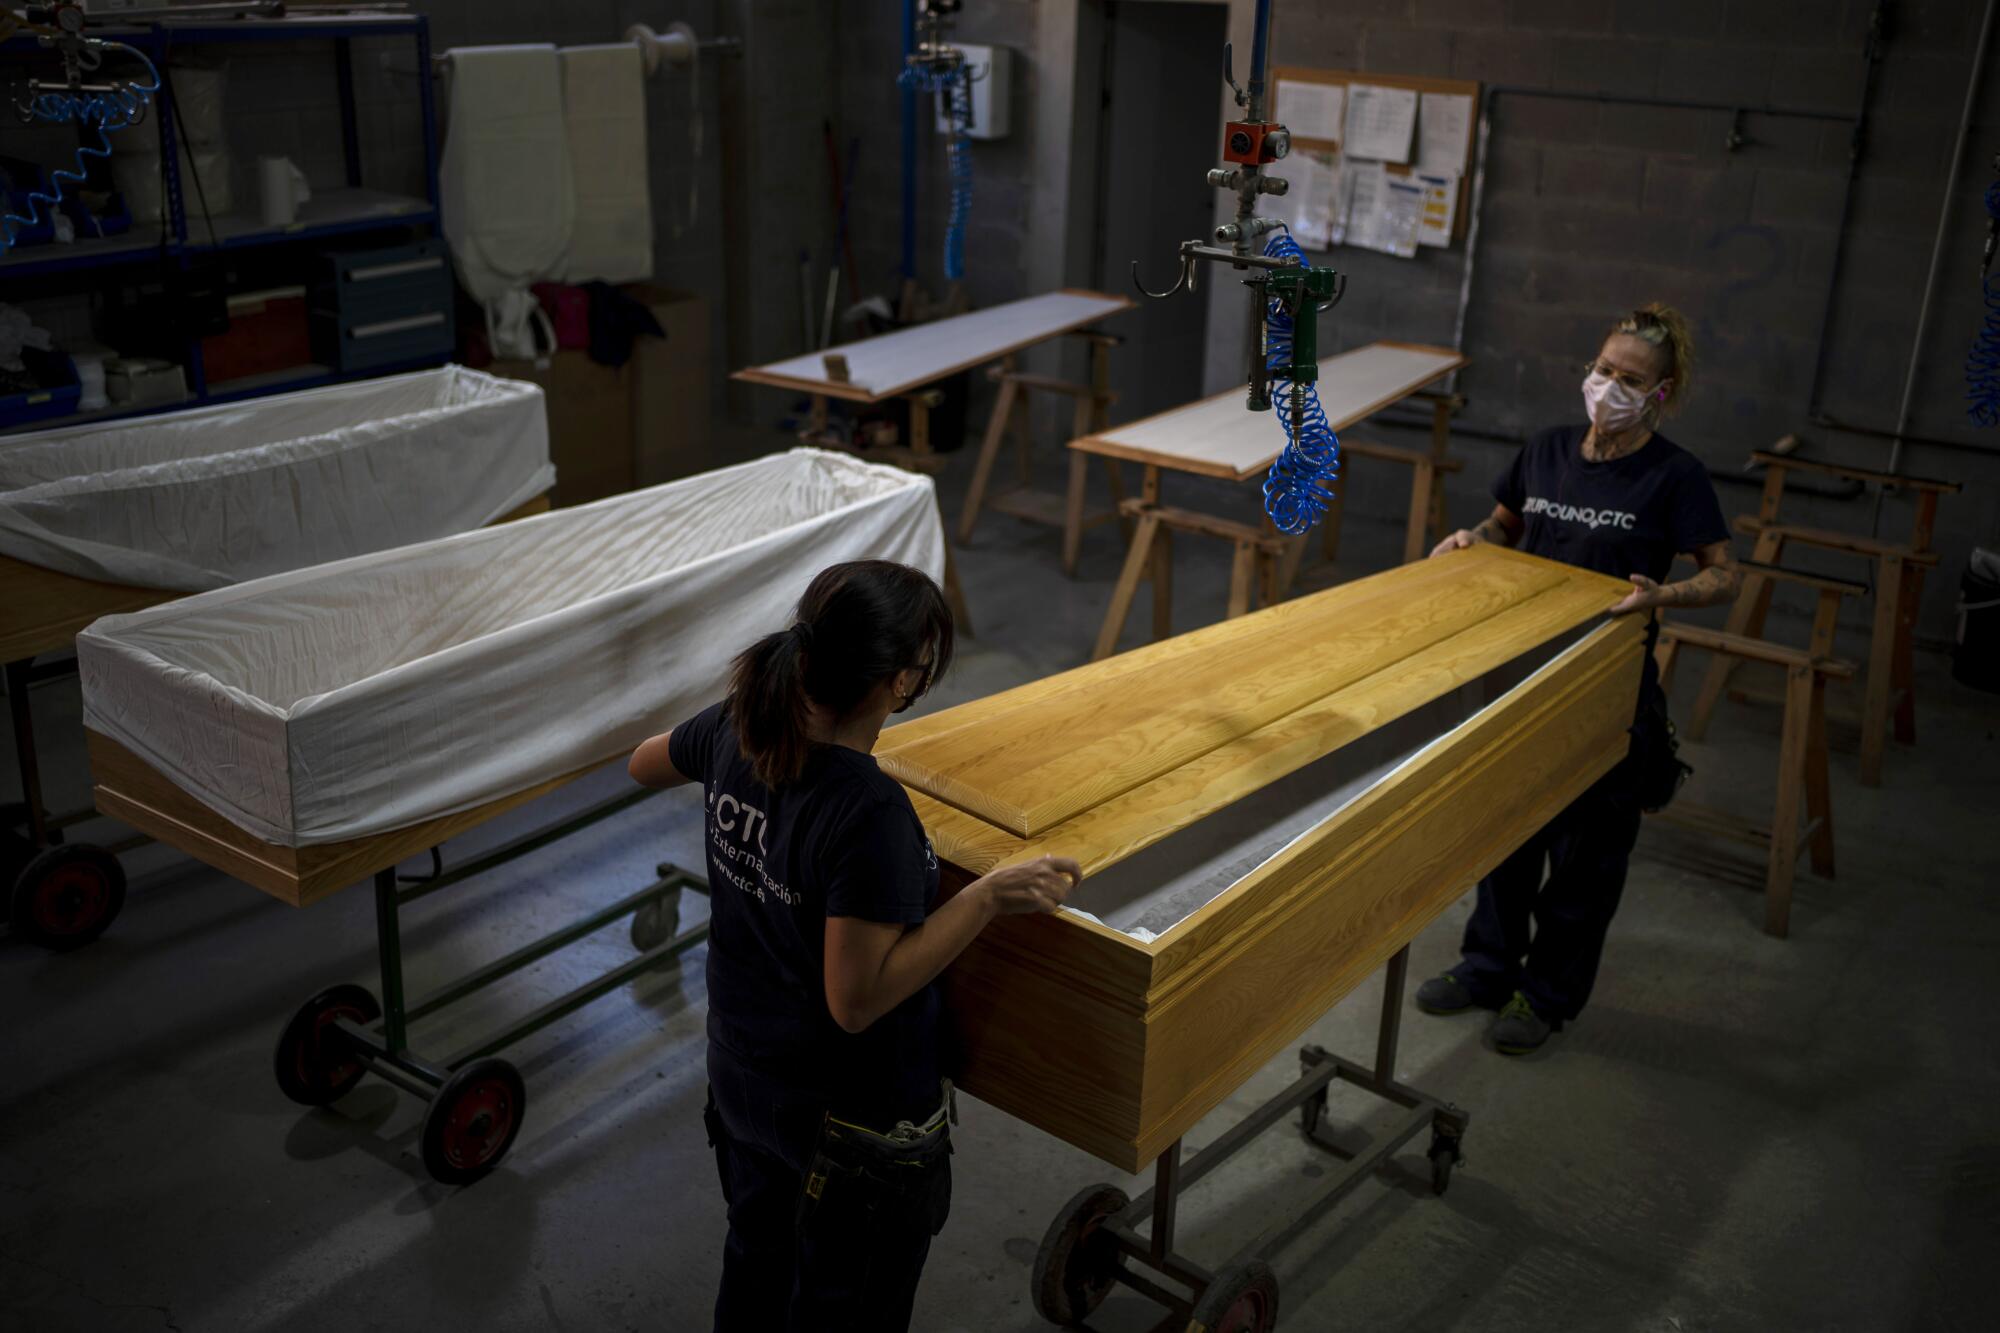 Employees work on coffins at the Eurocoffin factory in Barcelona, Spain.